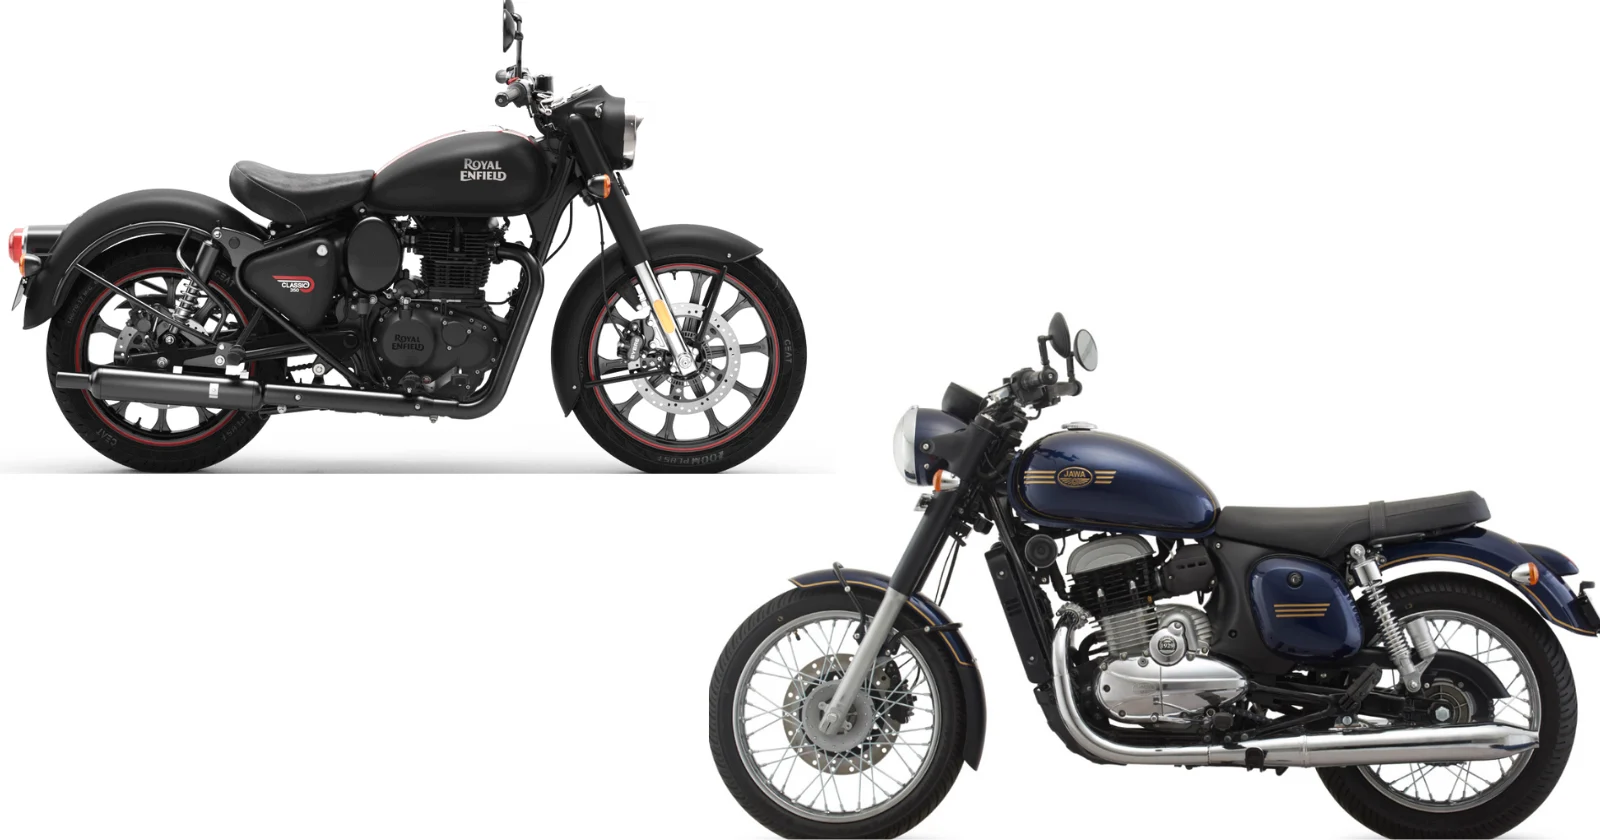 Jawa 42 vs Royal Enfield Classic 350: Compare prices, Specs, and Features